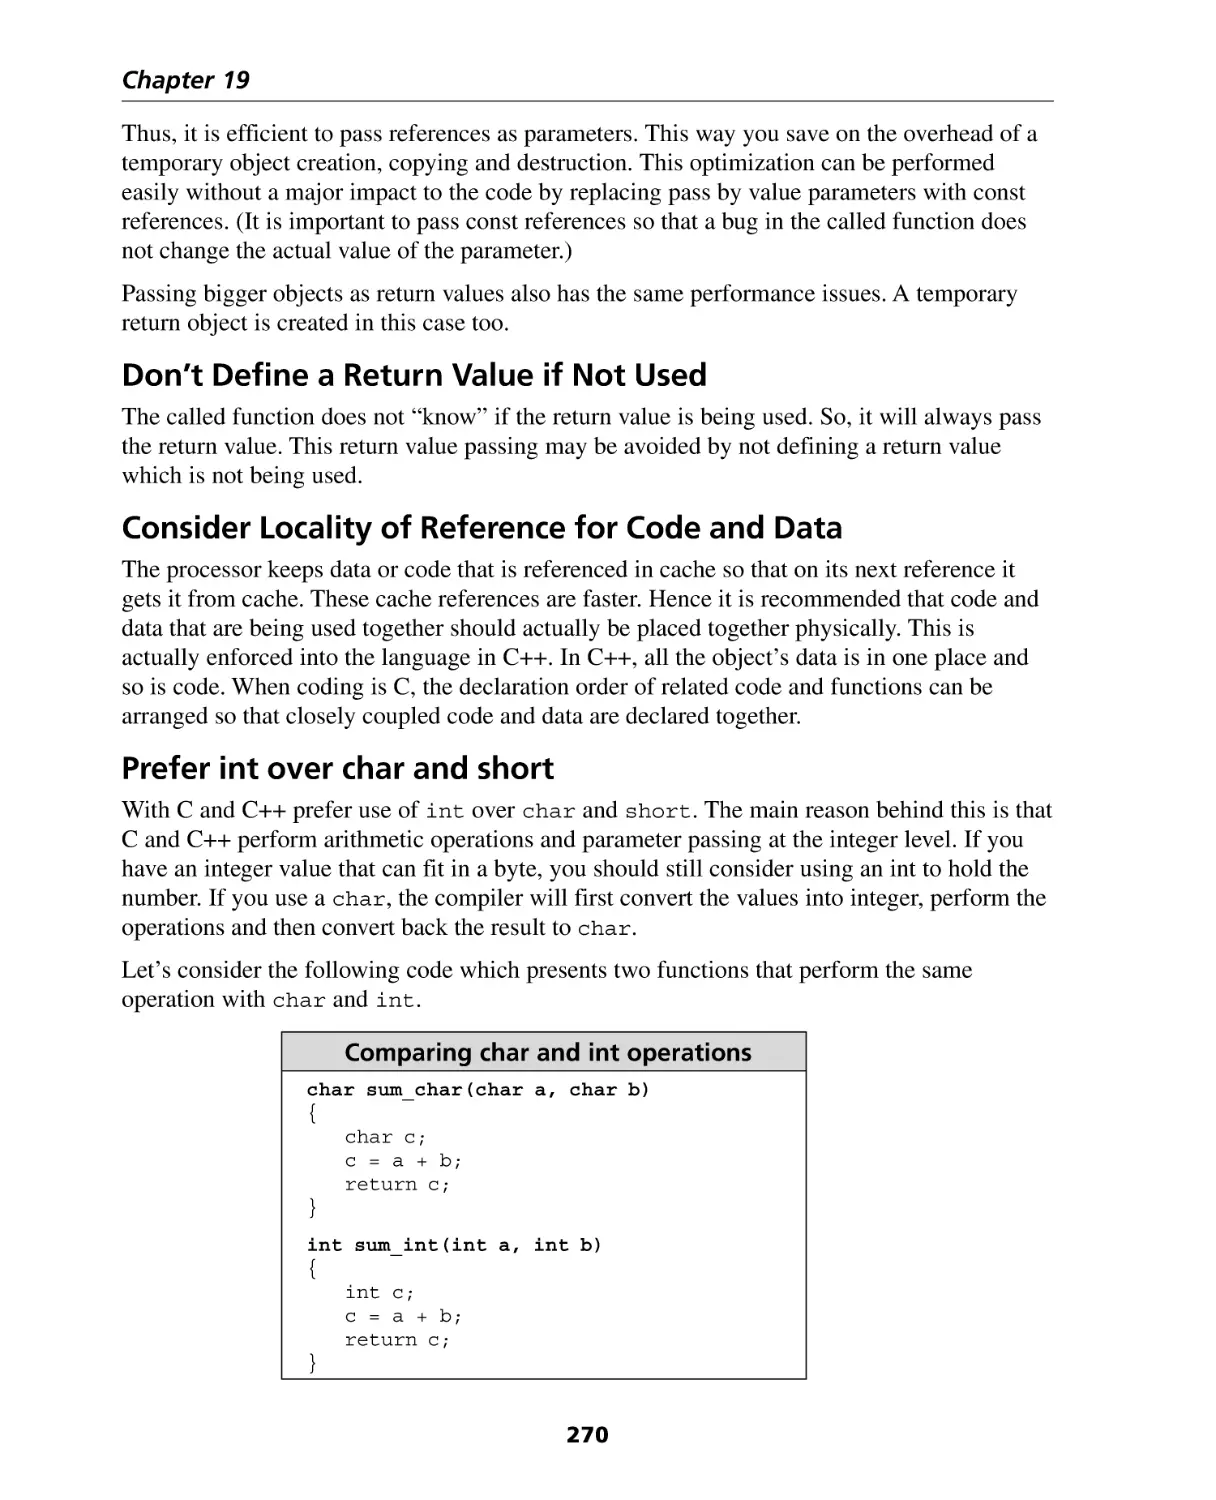 Don’t Define a Return Value if Not Used
Consider Locality of Reference for Code and Data
Prefer int over char and short